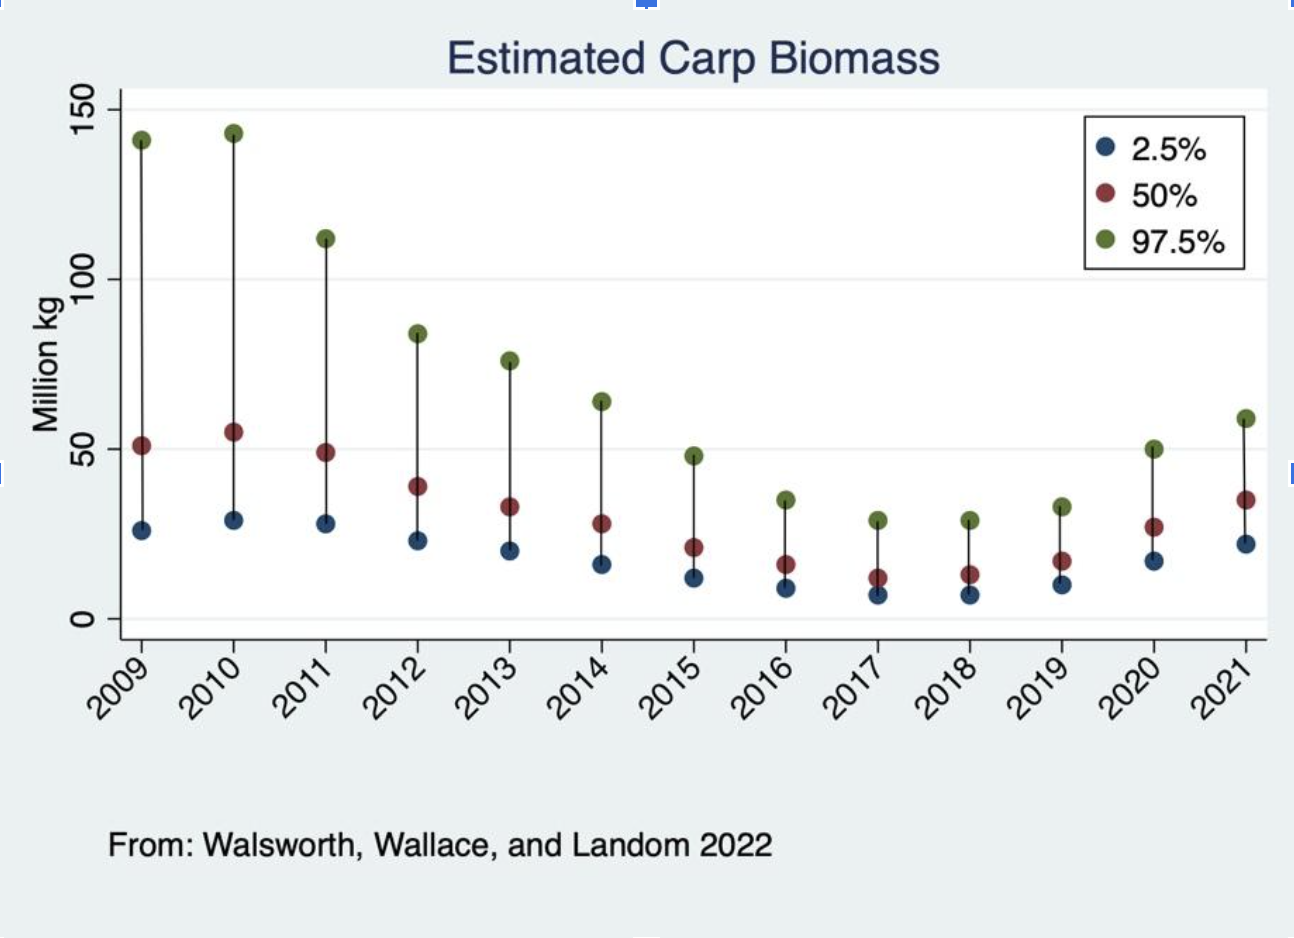 Estimated carp biomass in Utah Lake from 2009 until 2021. Estimates derived from Walsworth, Wallace, and Landom 2022 Table 1